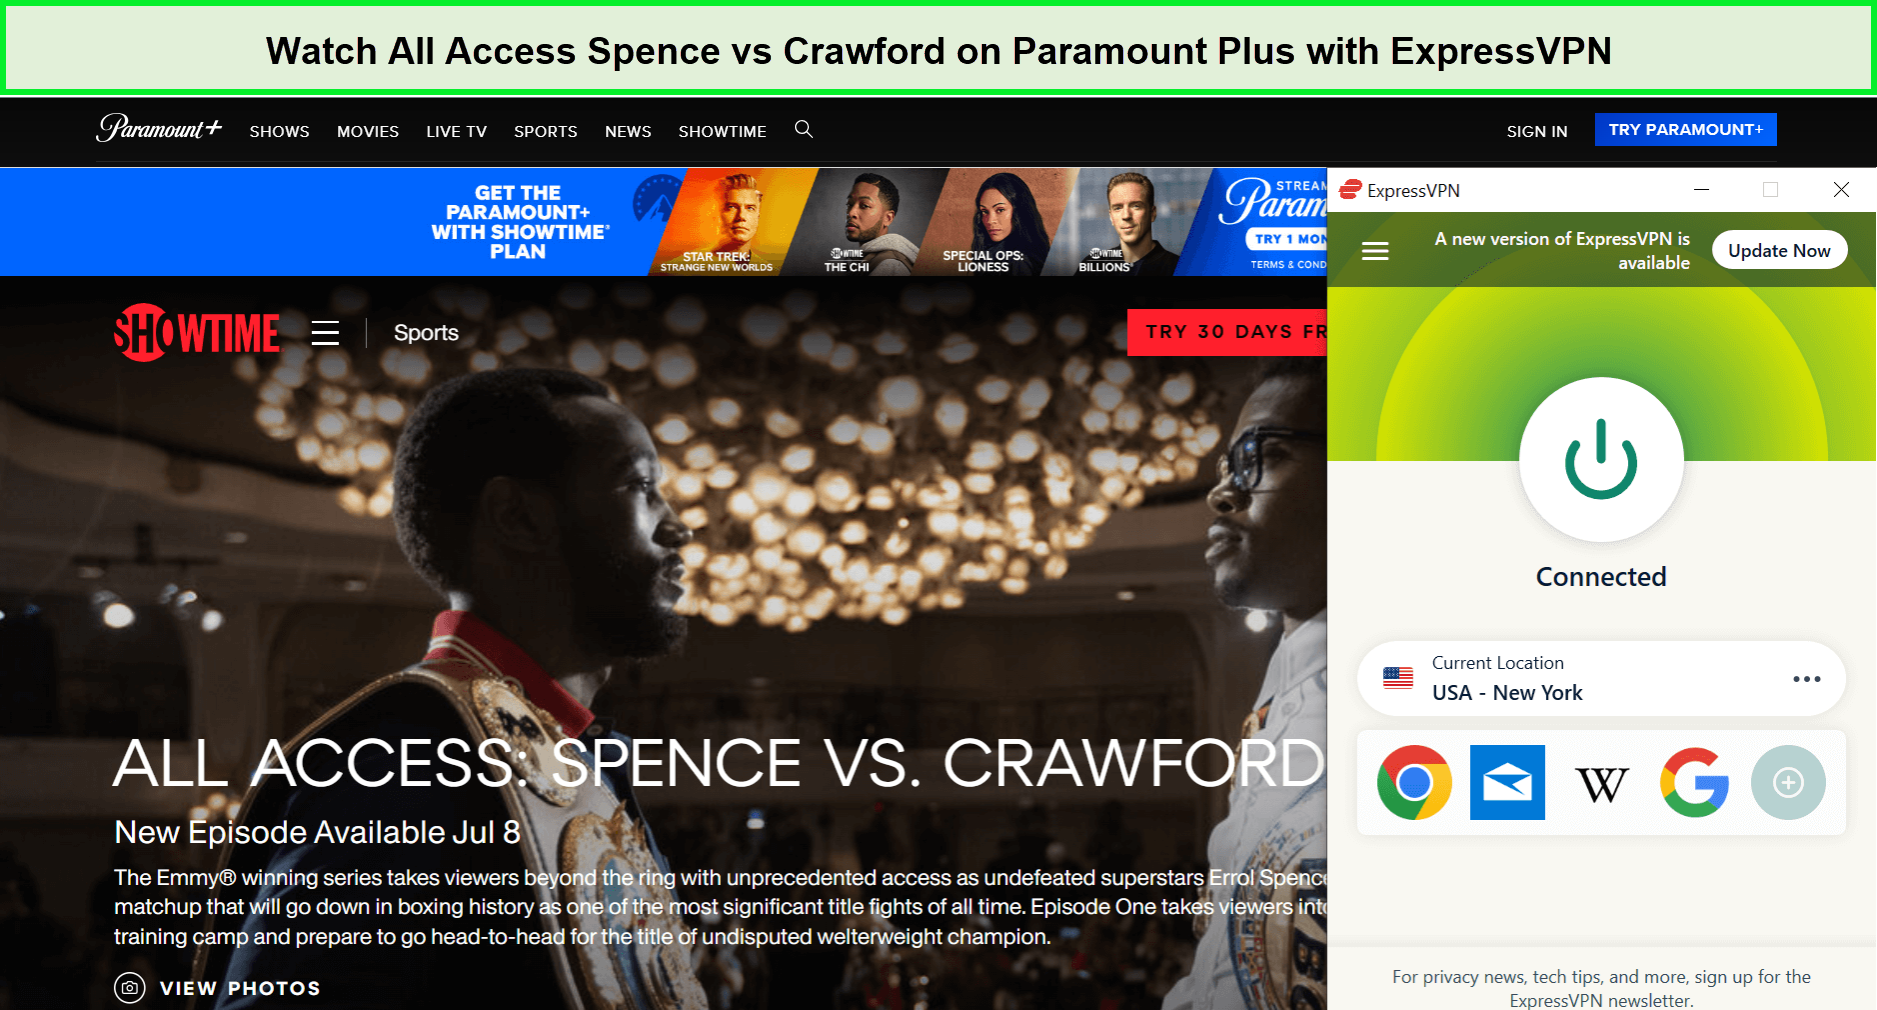 Watch-All-Access-Spence-vs-Crawford-in-UAE-on-Paramount-Plus-with-ExpressVPN